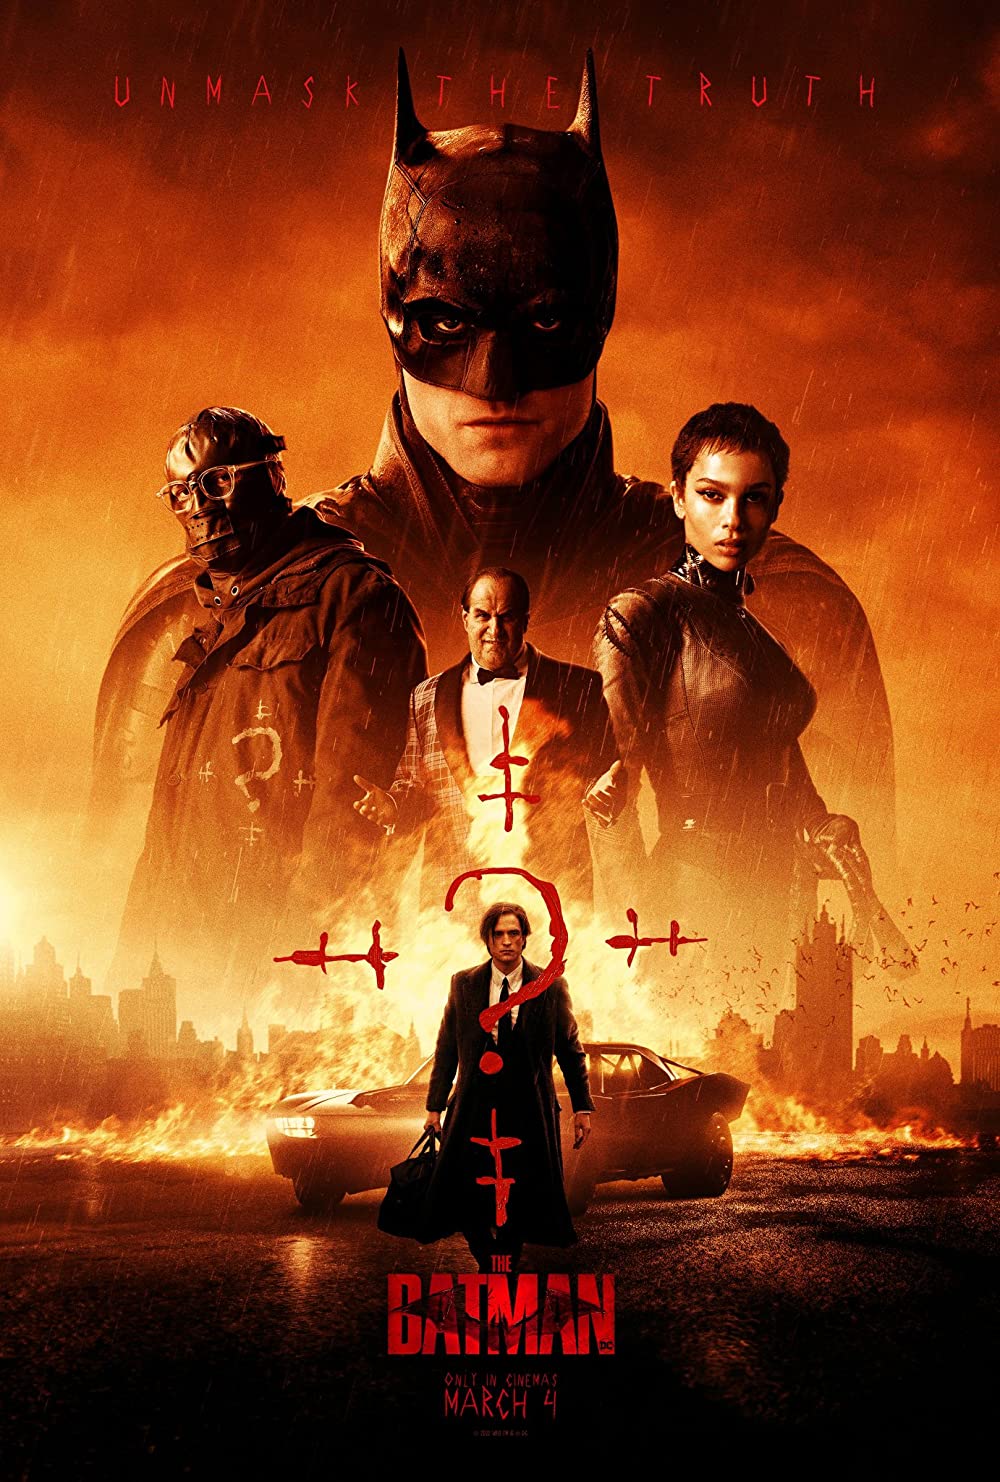 The Batman 2022 movie poster, Robert Pattinson as Bruce Wayne in the lower center and as Batman above. The Riddler, Penguin, and Catwoman are in front of Batman.